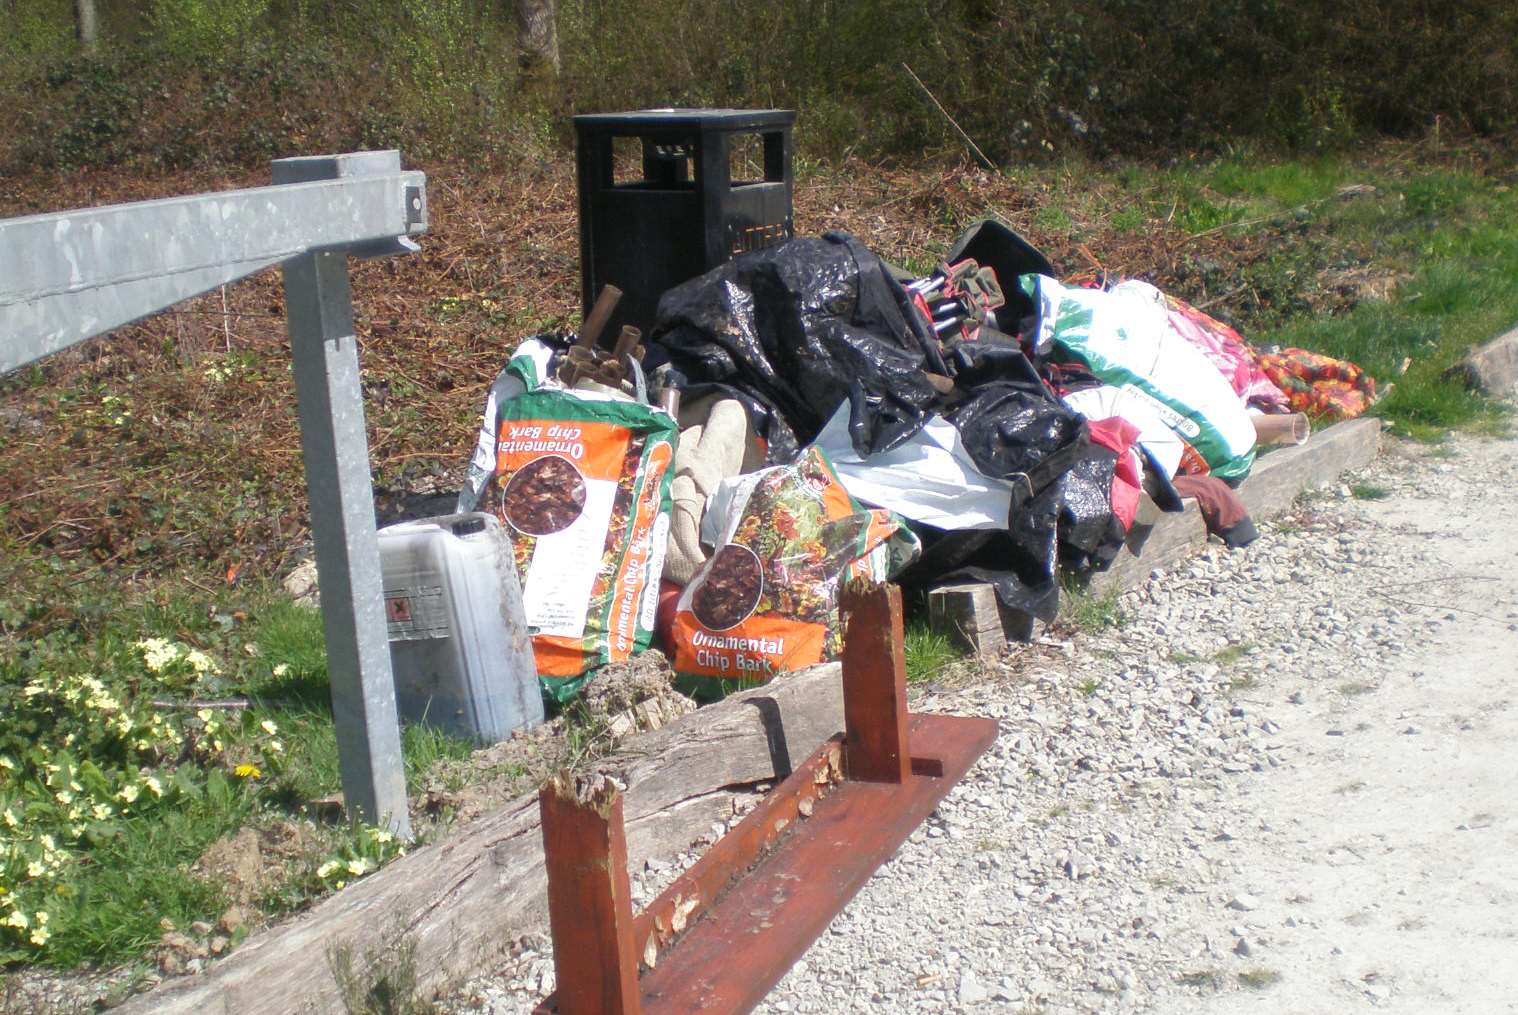 Damage and rubbish at the woods. Picture from the Woodland Trust